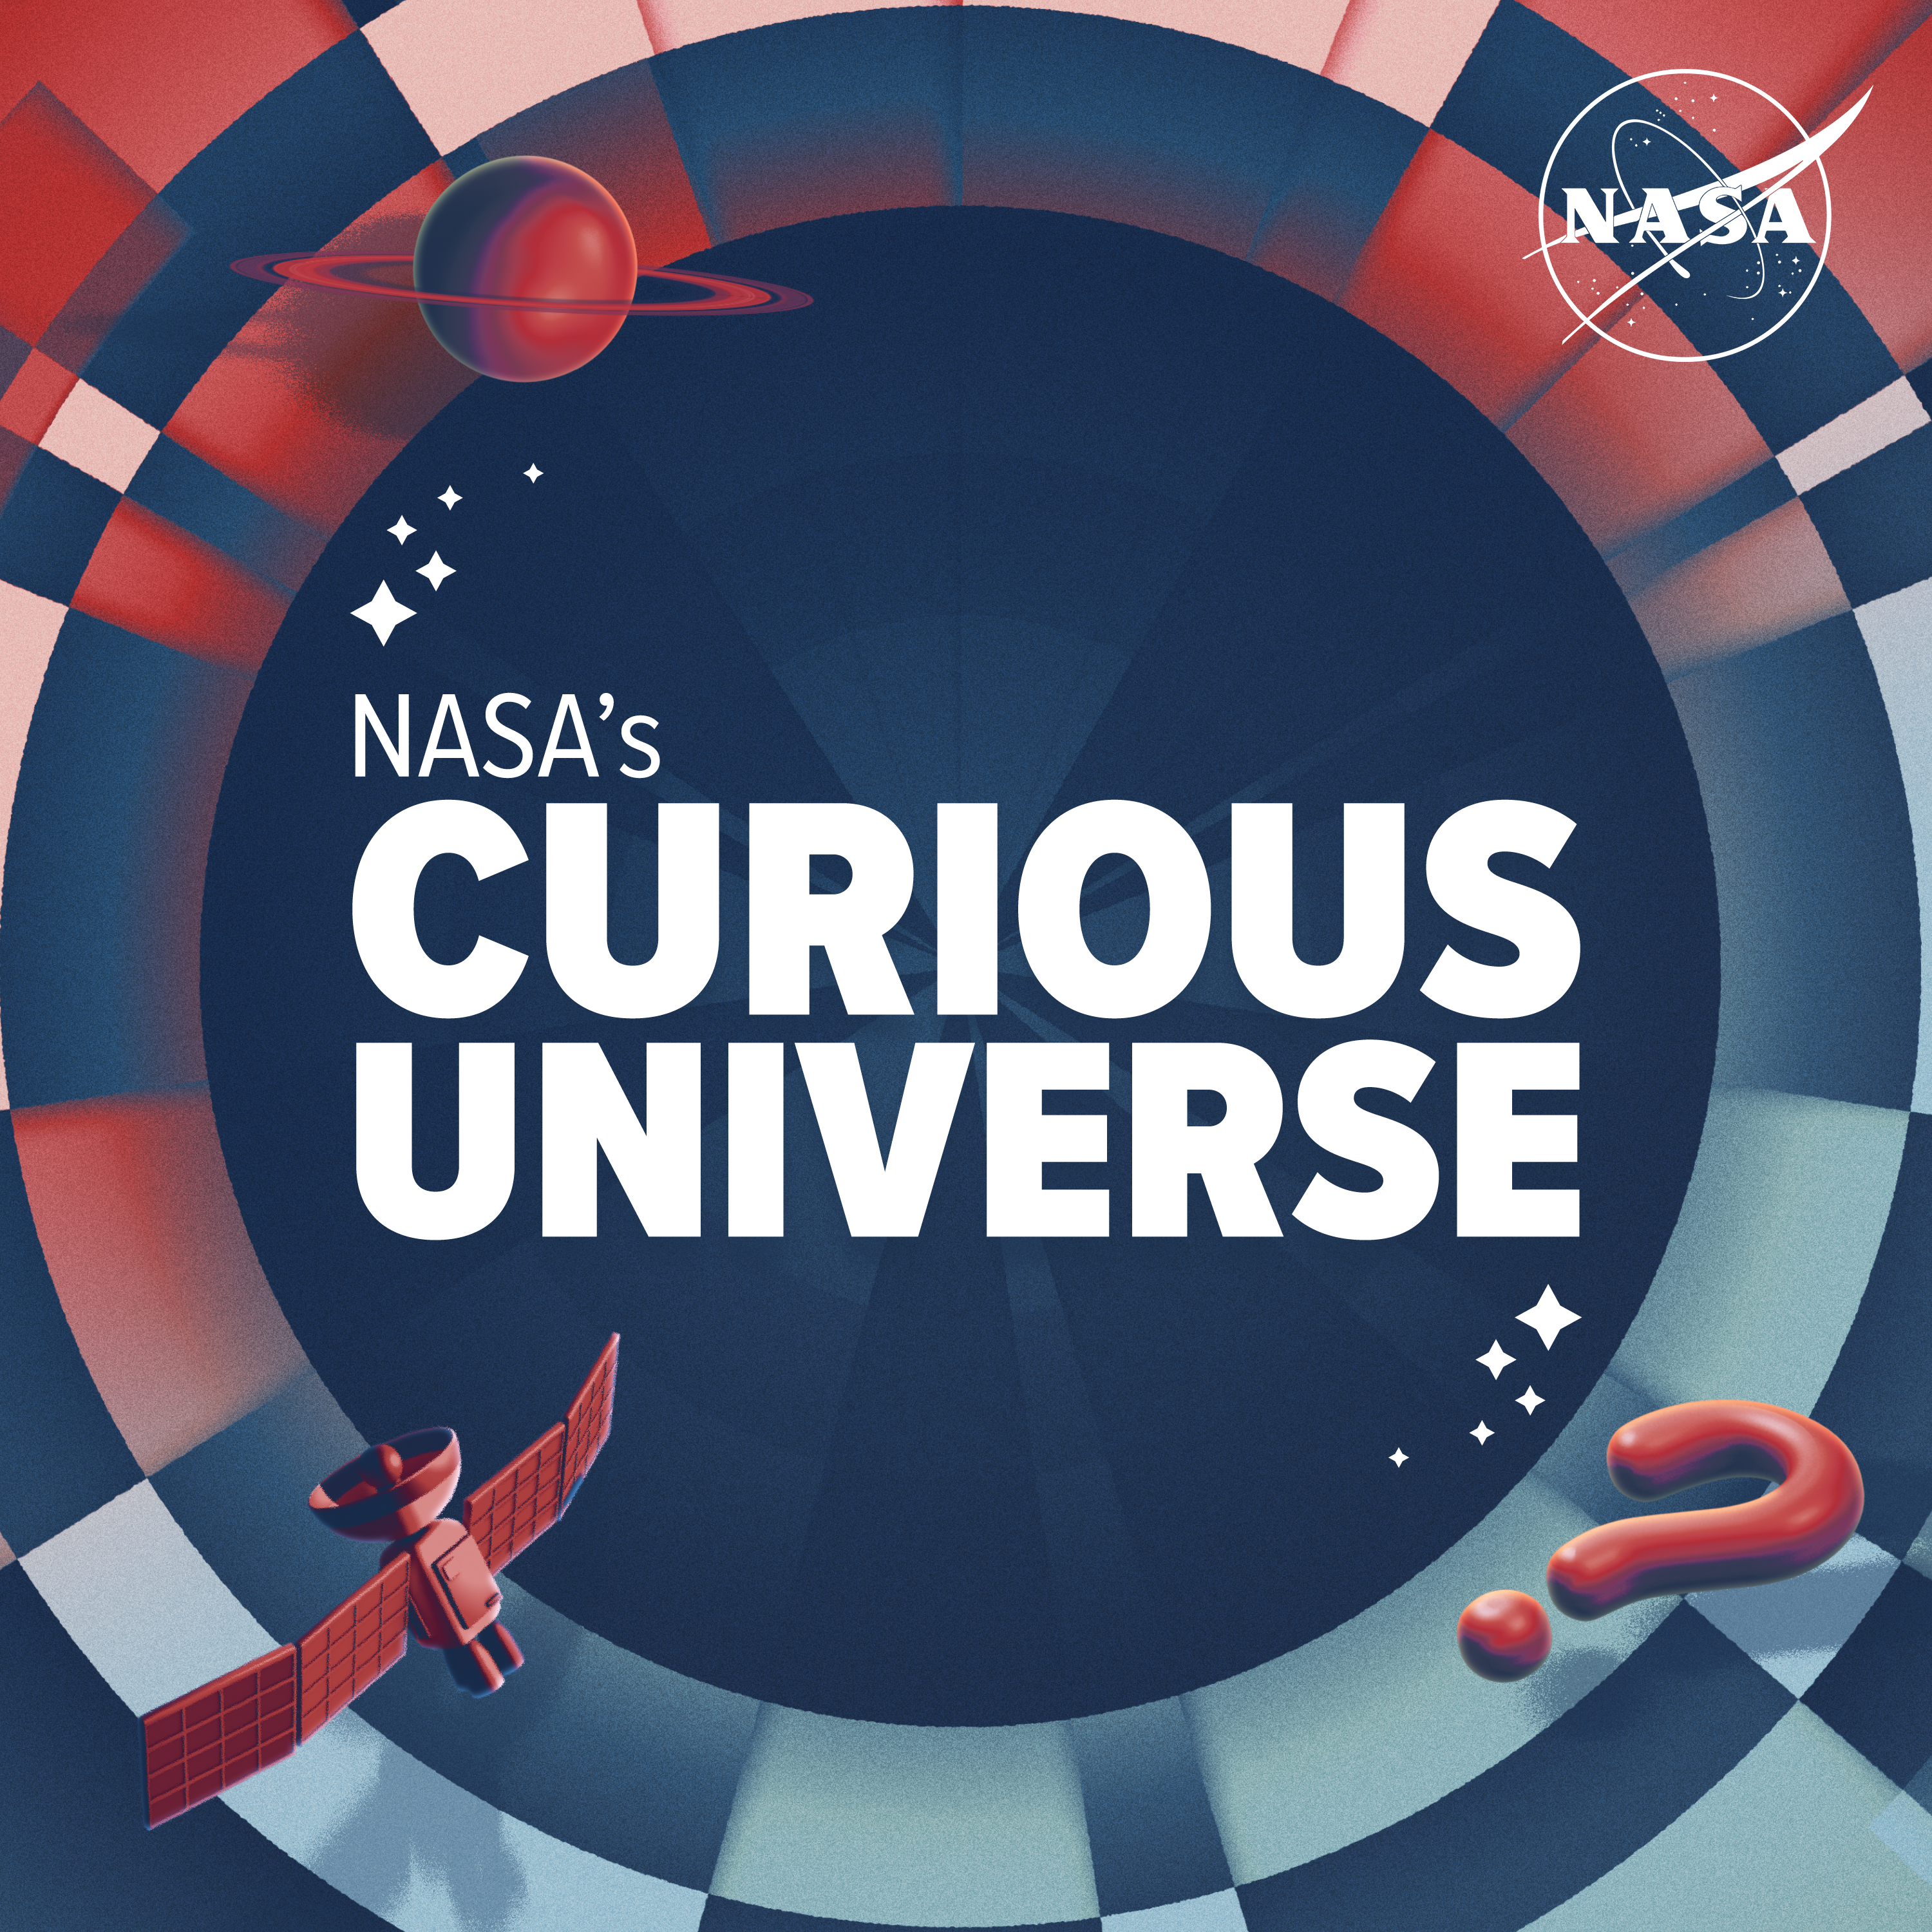 A blue and red checkered decorative motif surround the text "NASA's Curious Universe." The image also includes illustrative renderings of the planet Saturn, a satellite, and a question mark. The NASA insignia is in the upper right corner.